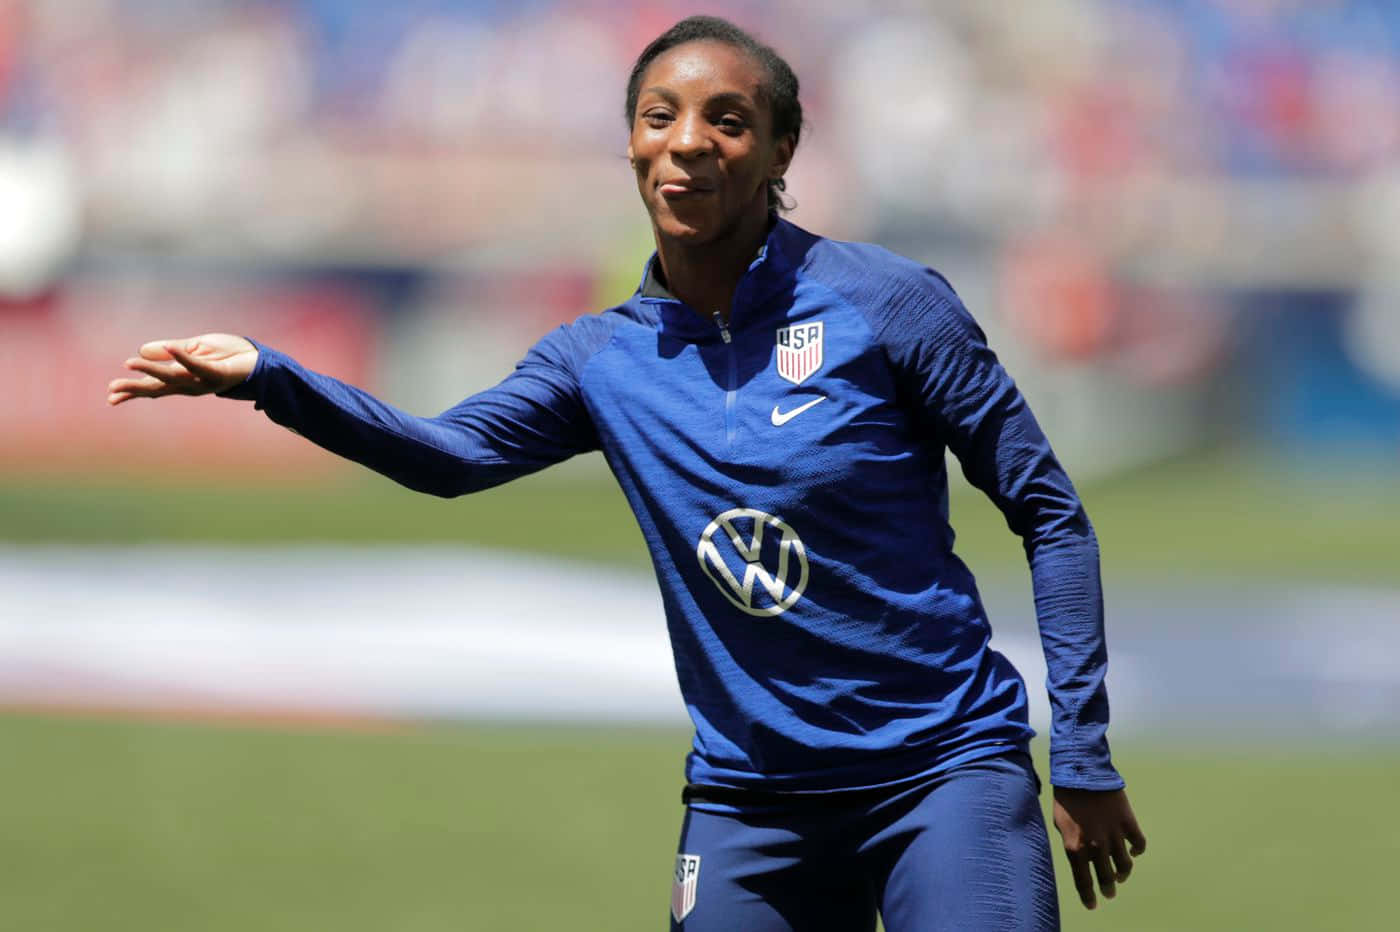 Crystal Dunn In Action On The Soccer Field Wallpaper